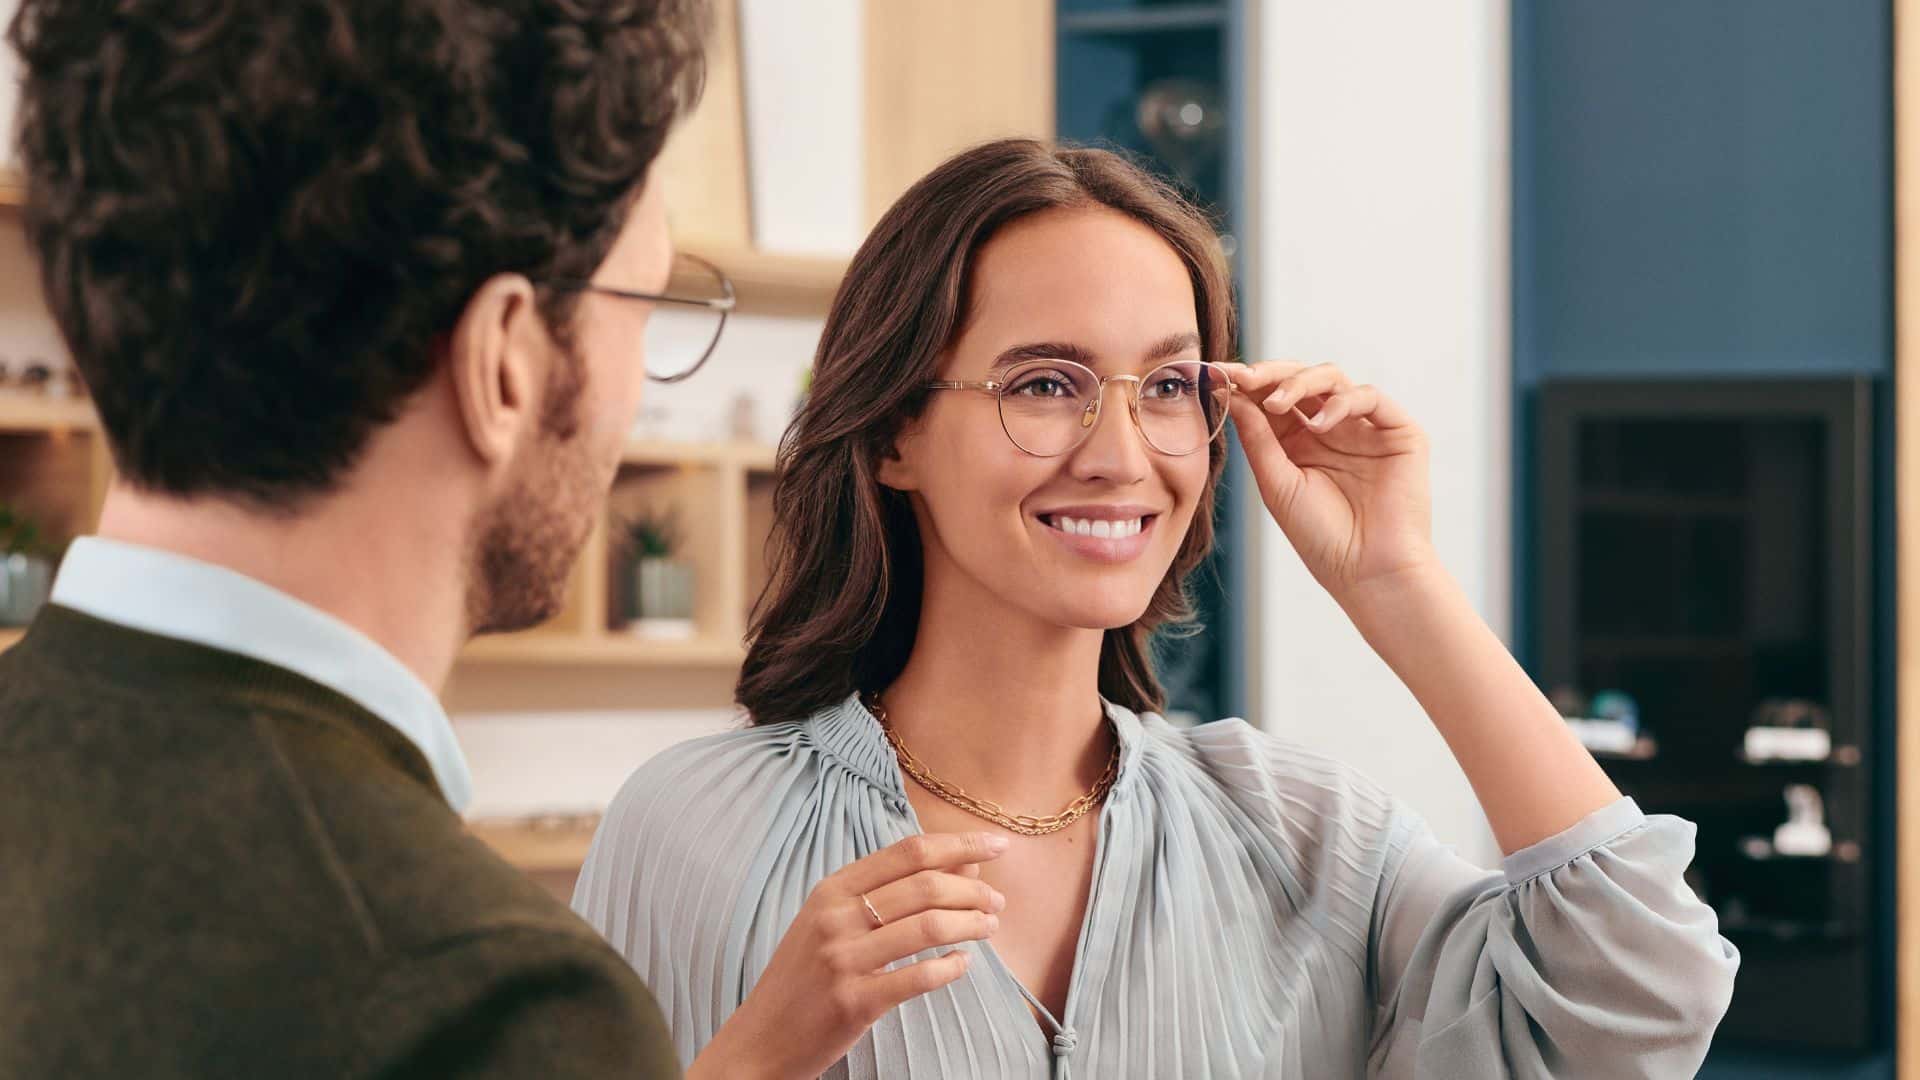 Woman smiling while trying on glasses